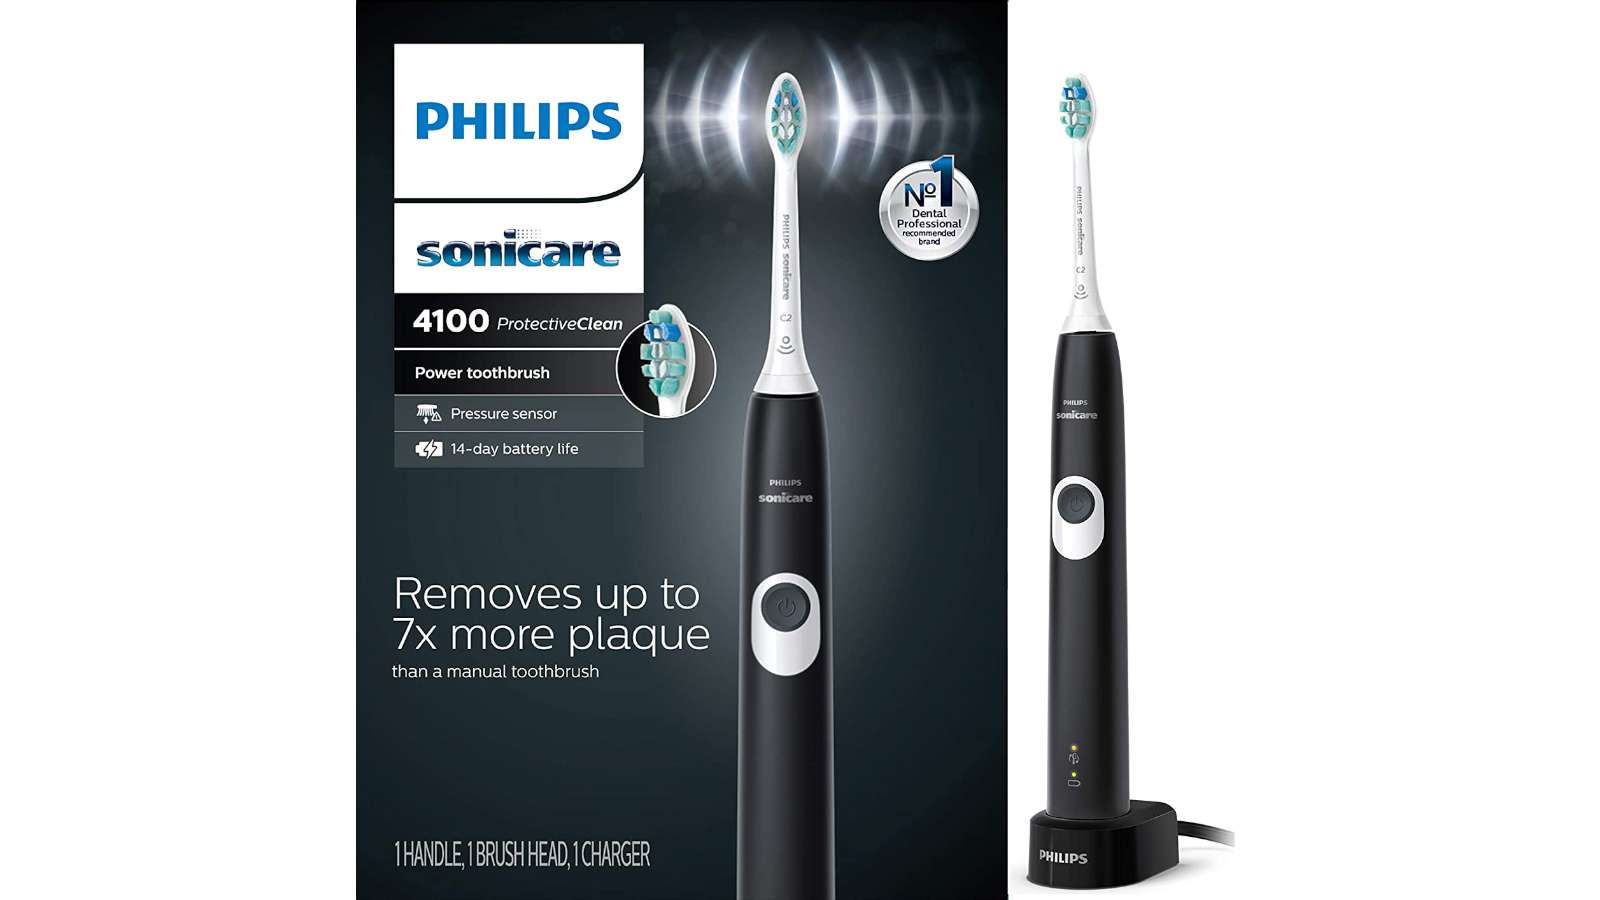 reviews on best philips sonicare toothbrushes - Philips Sonicare ProtectiveClean 4100 (Black, HX6810/50) toothbrush and its packaging